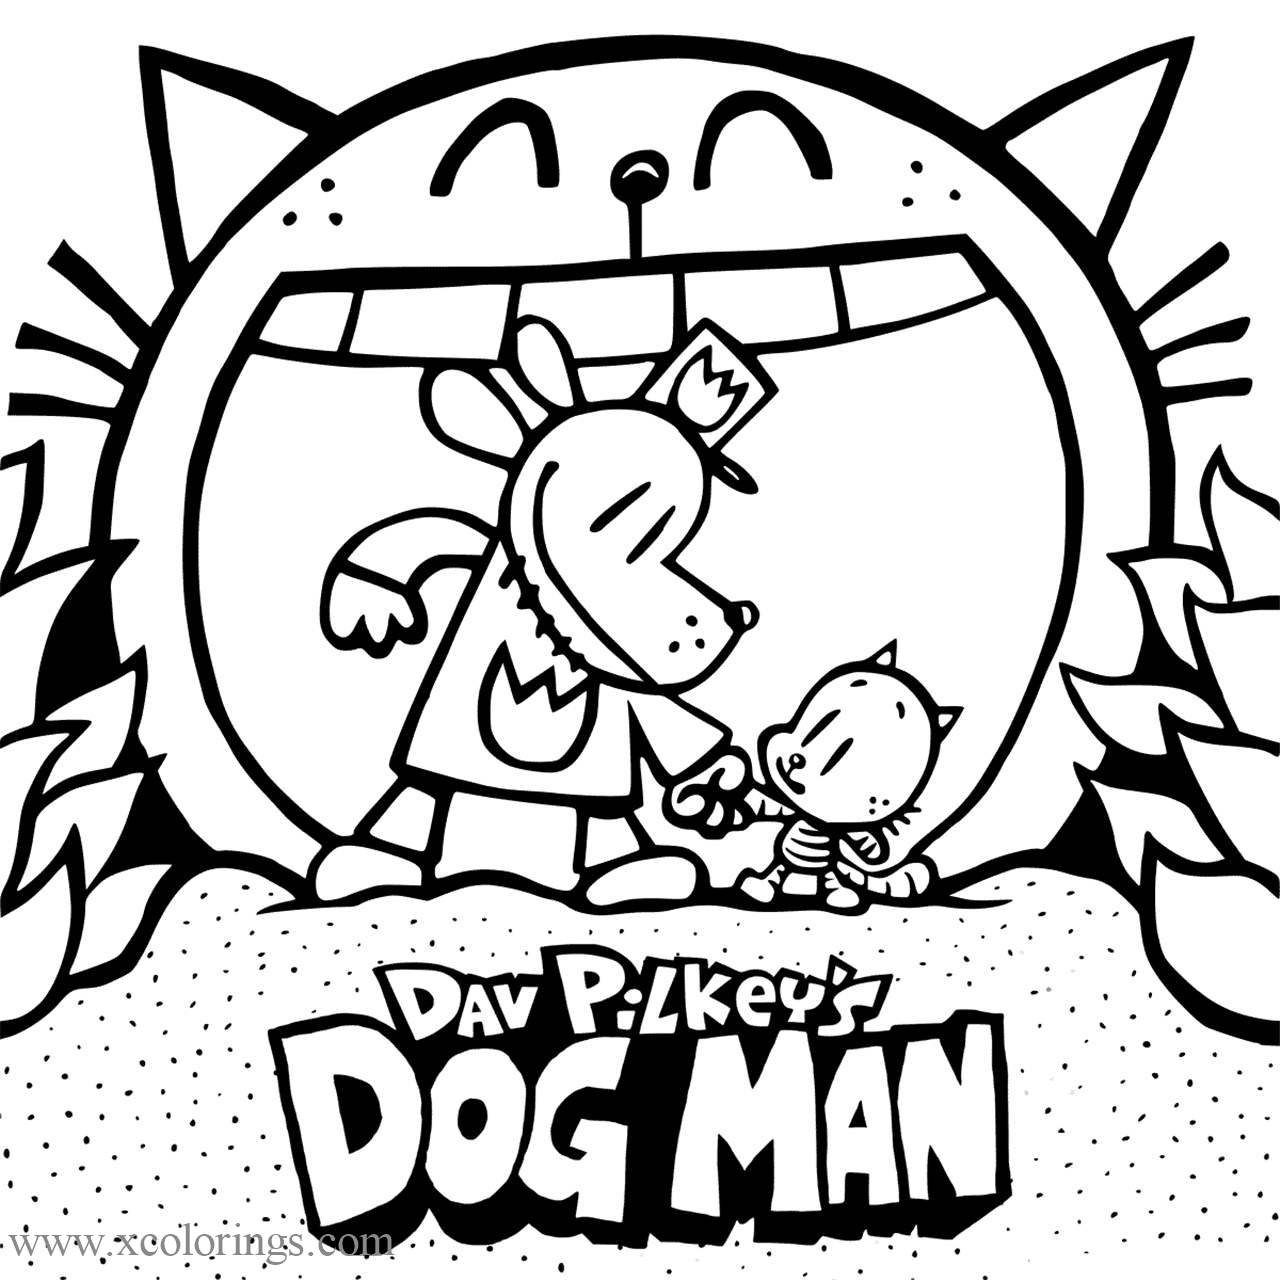 Dogman coloring pages for kids kid coloring page free coloring pages pokemon coloring pages